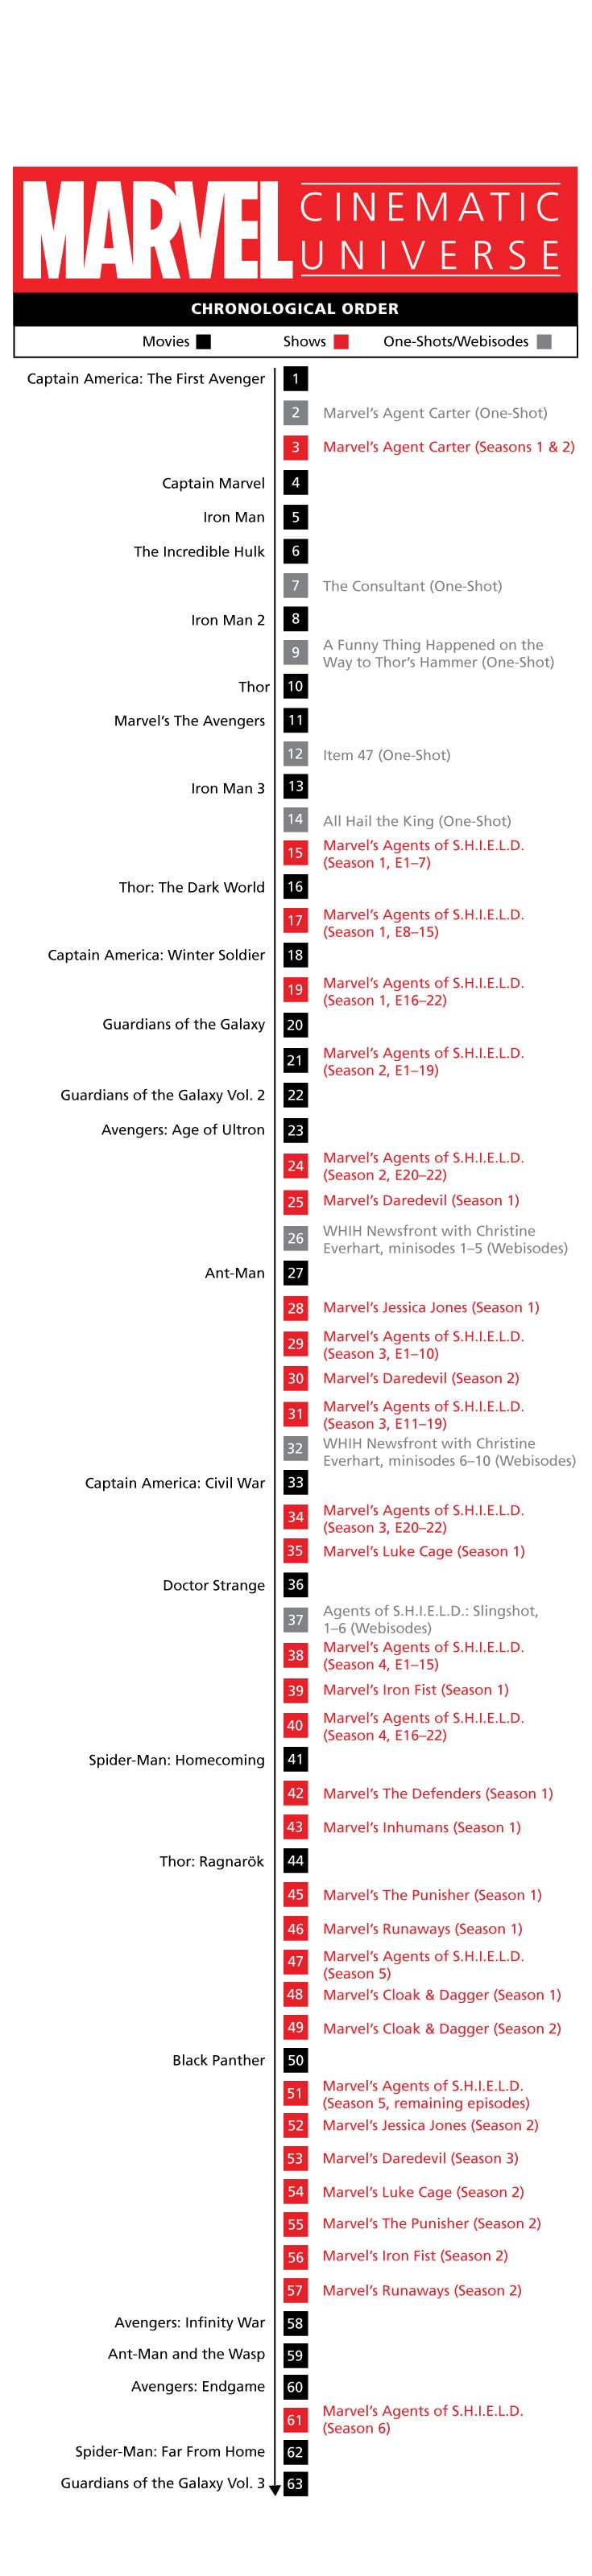 How to watch the Marvel movies in order